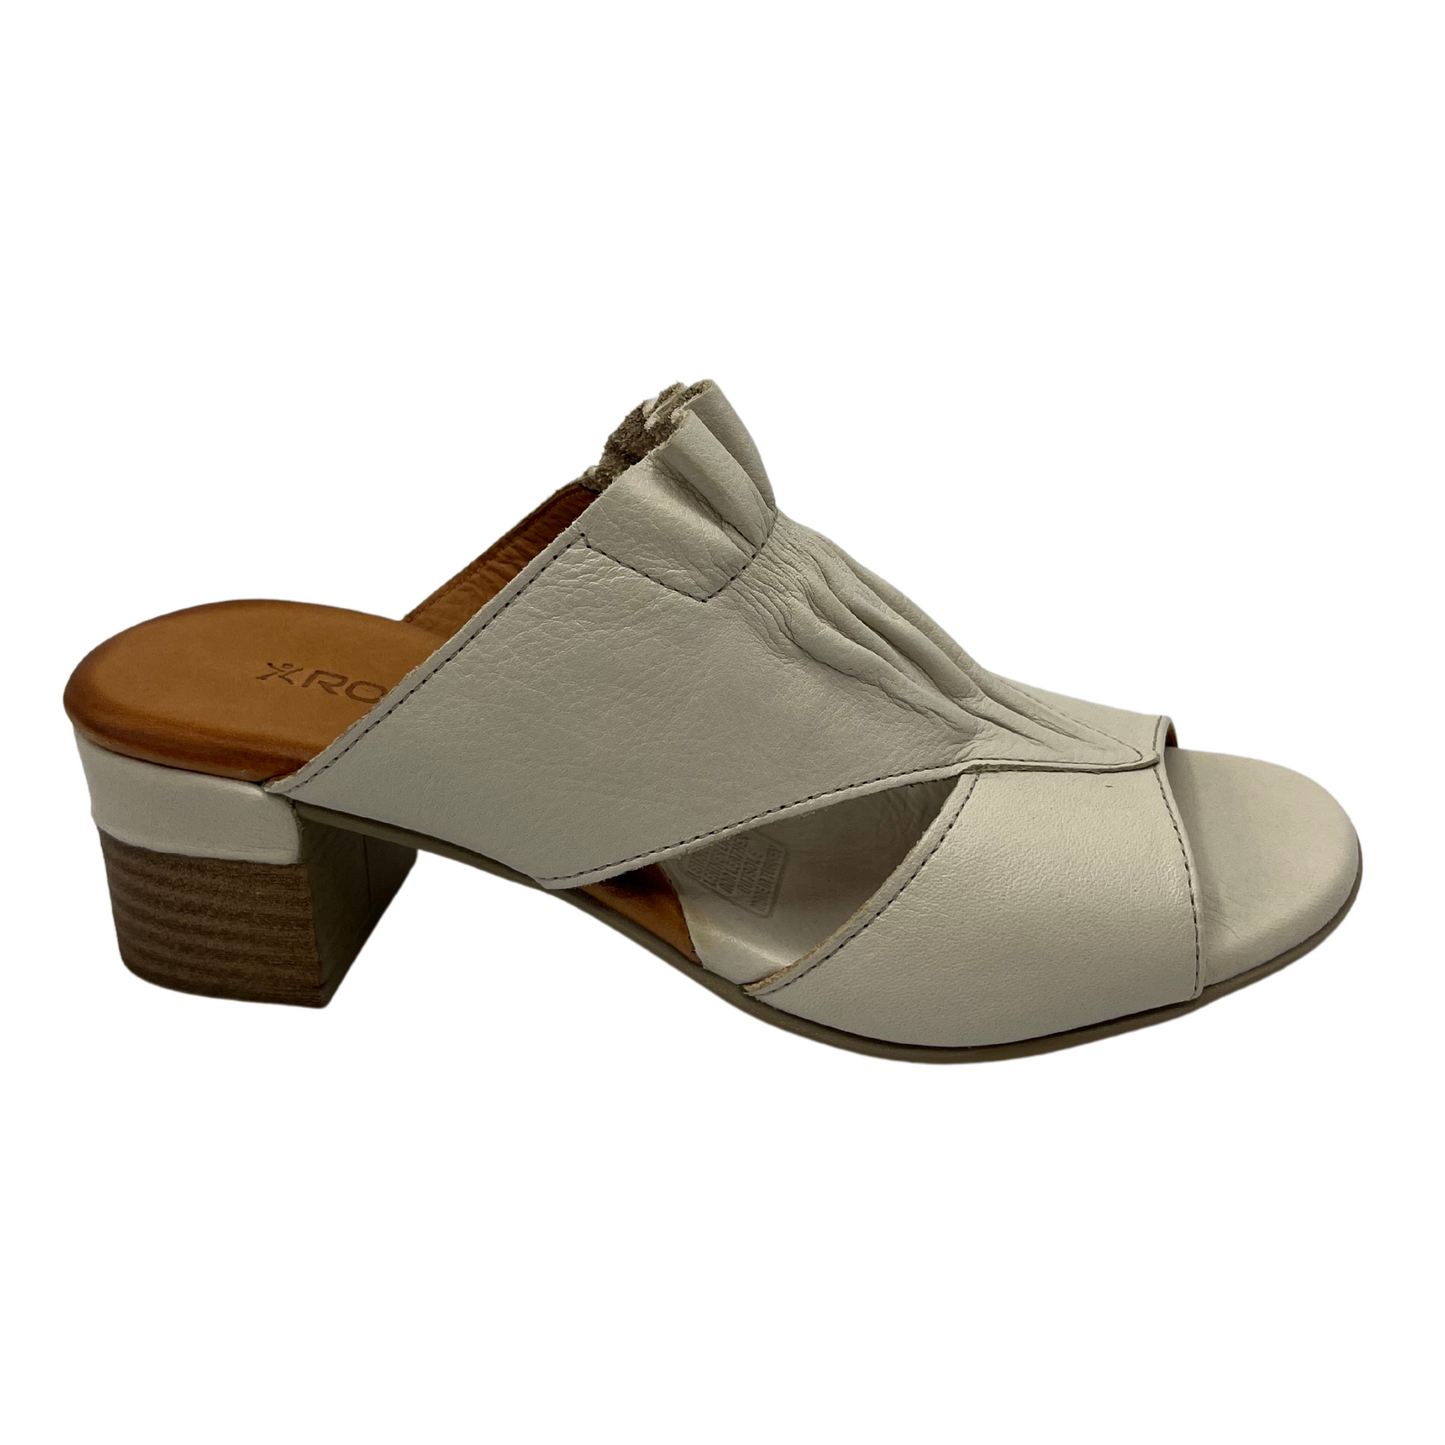 Right facing view of white leather sandal with block heel and peep toe